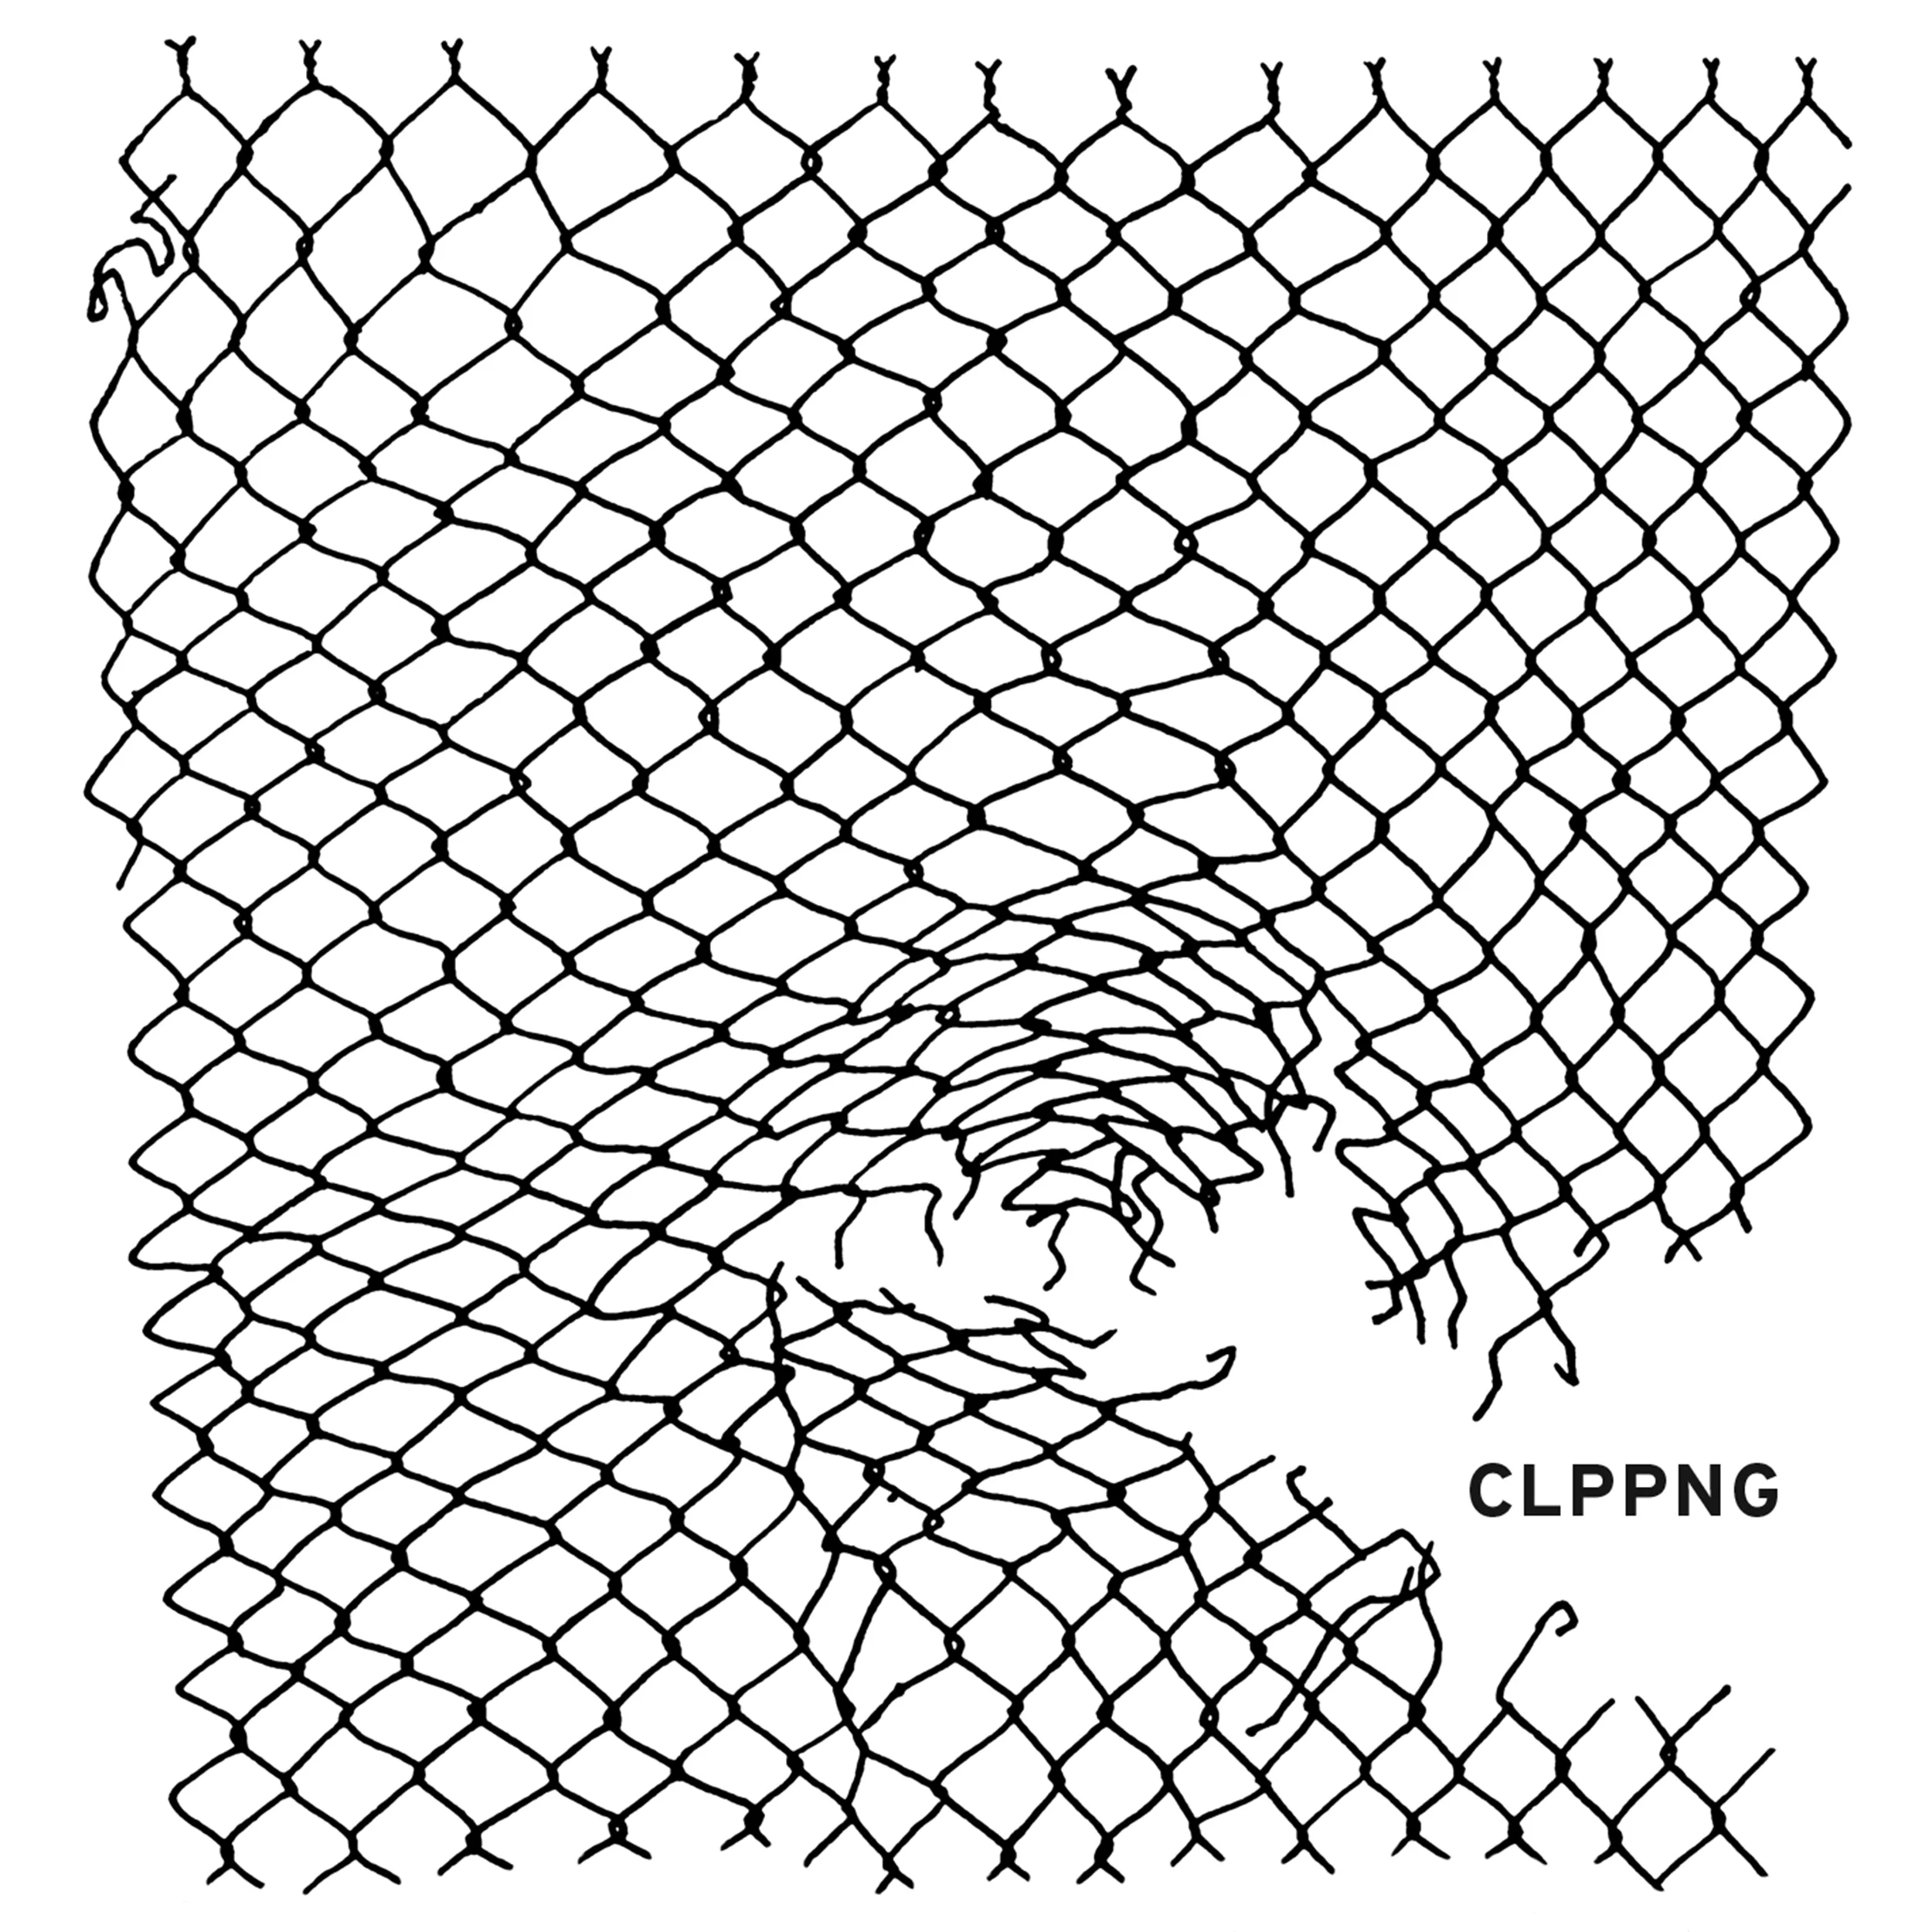 CLPPNG - clipping.